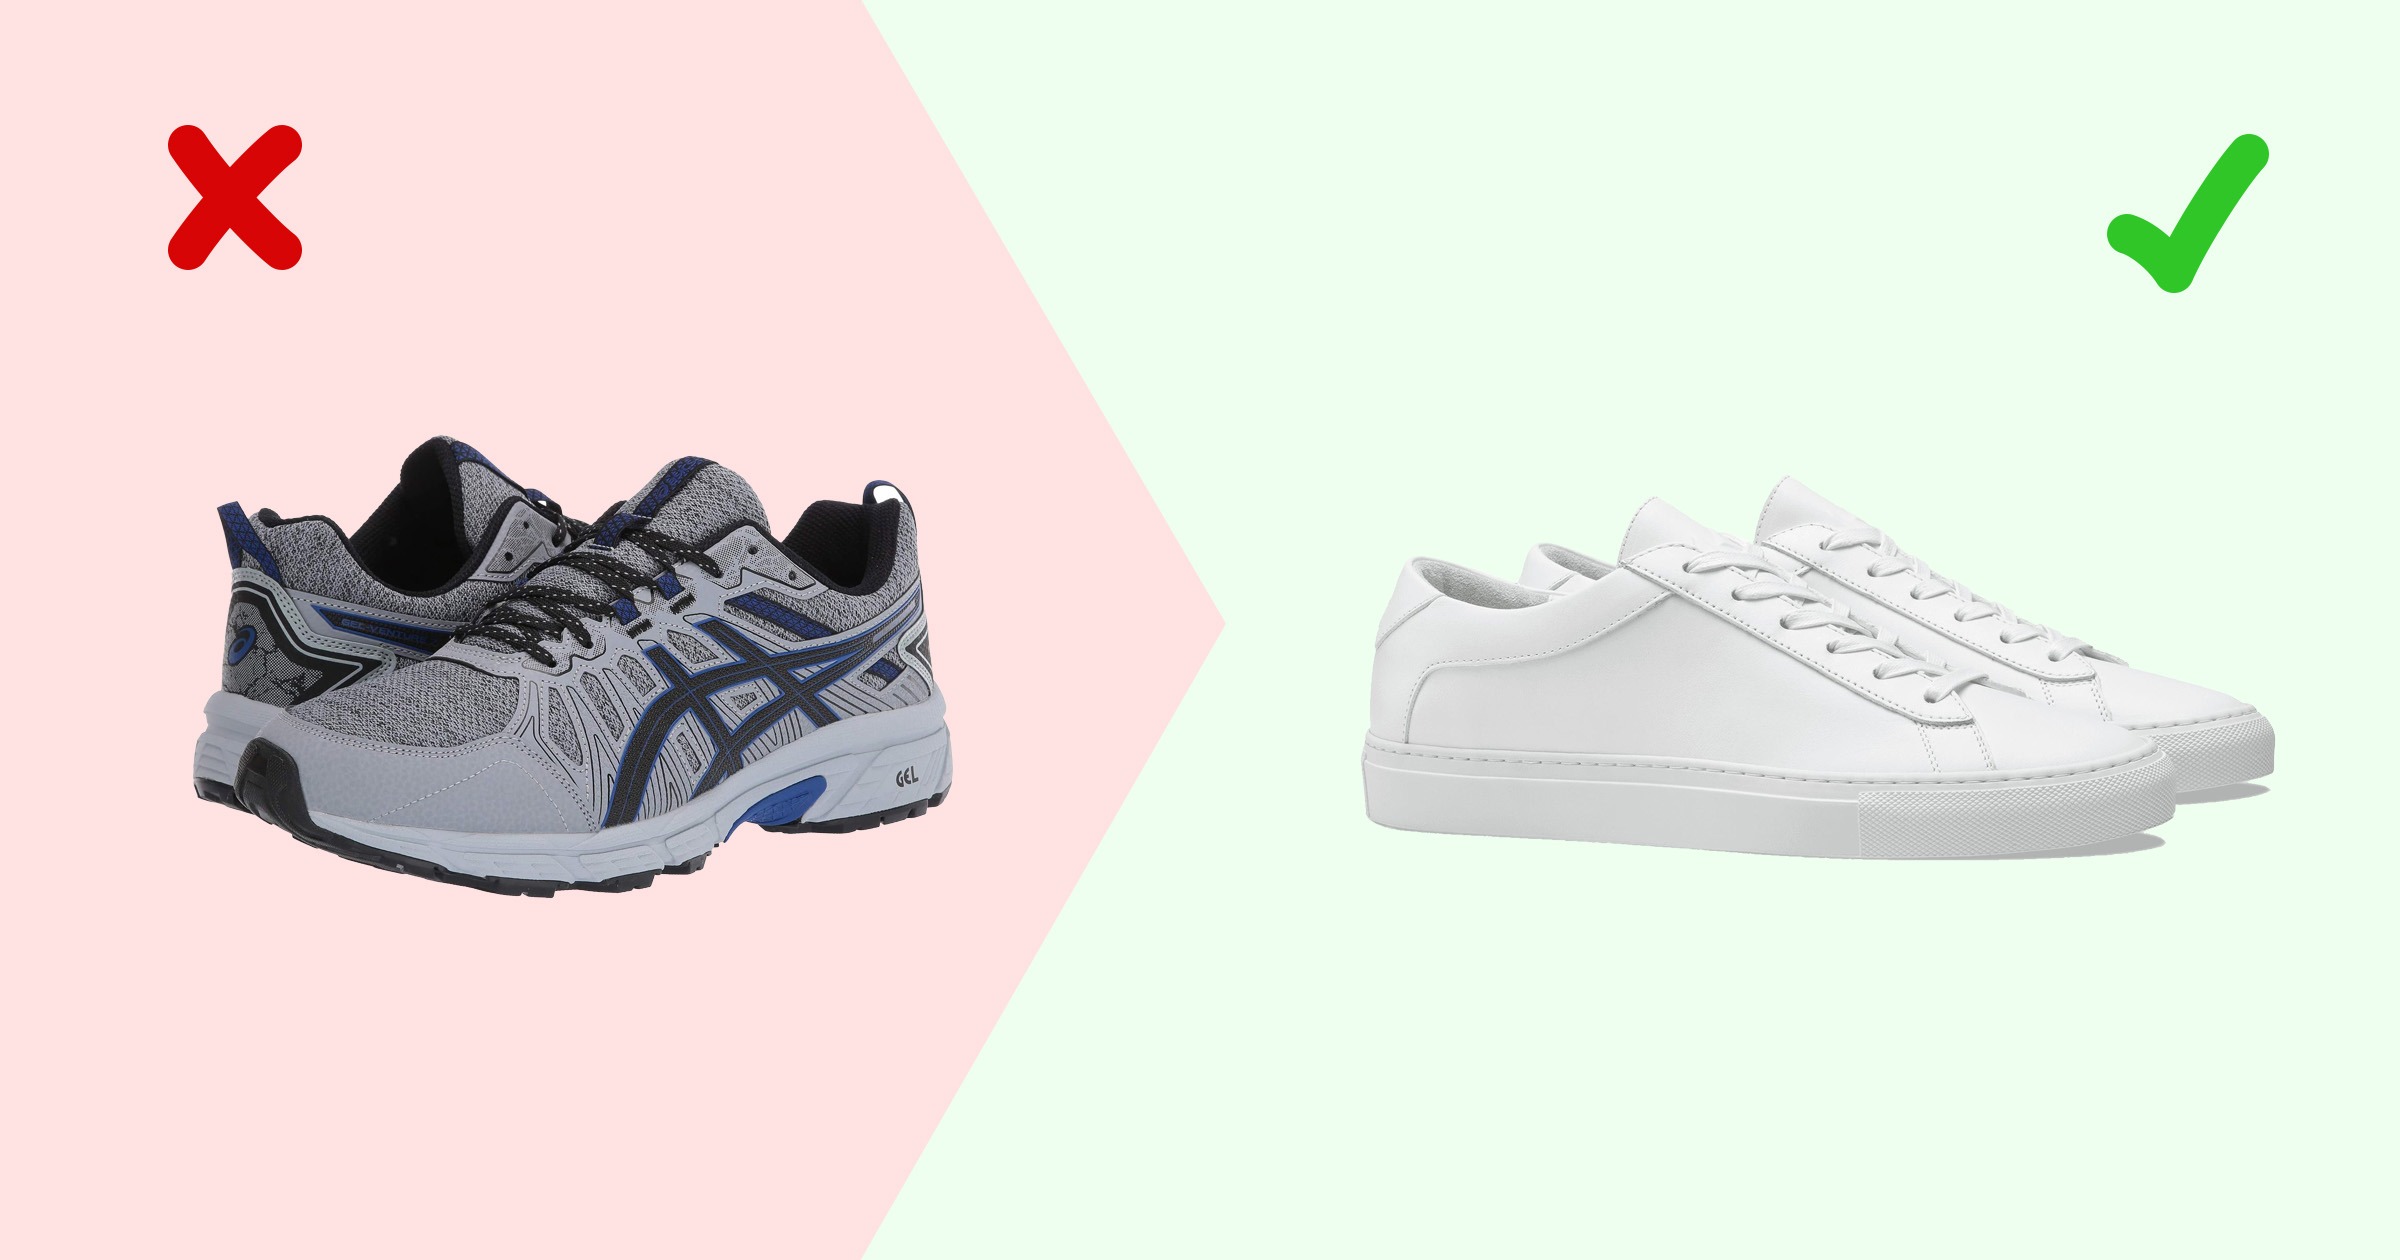 flatlay of running shoes vs whites sneakers